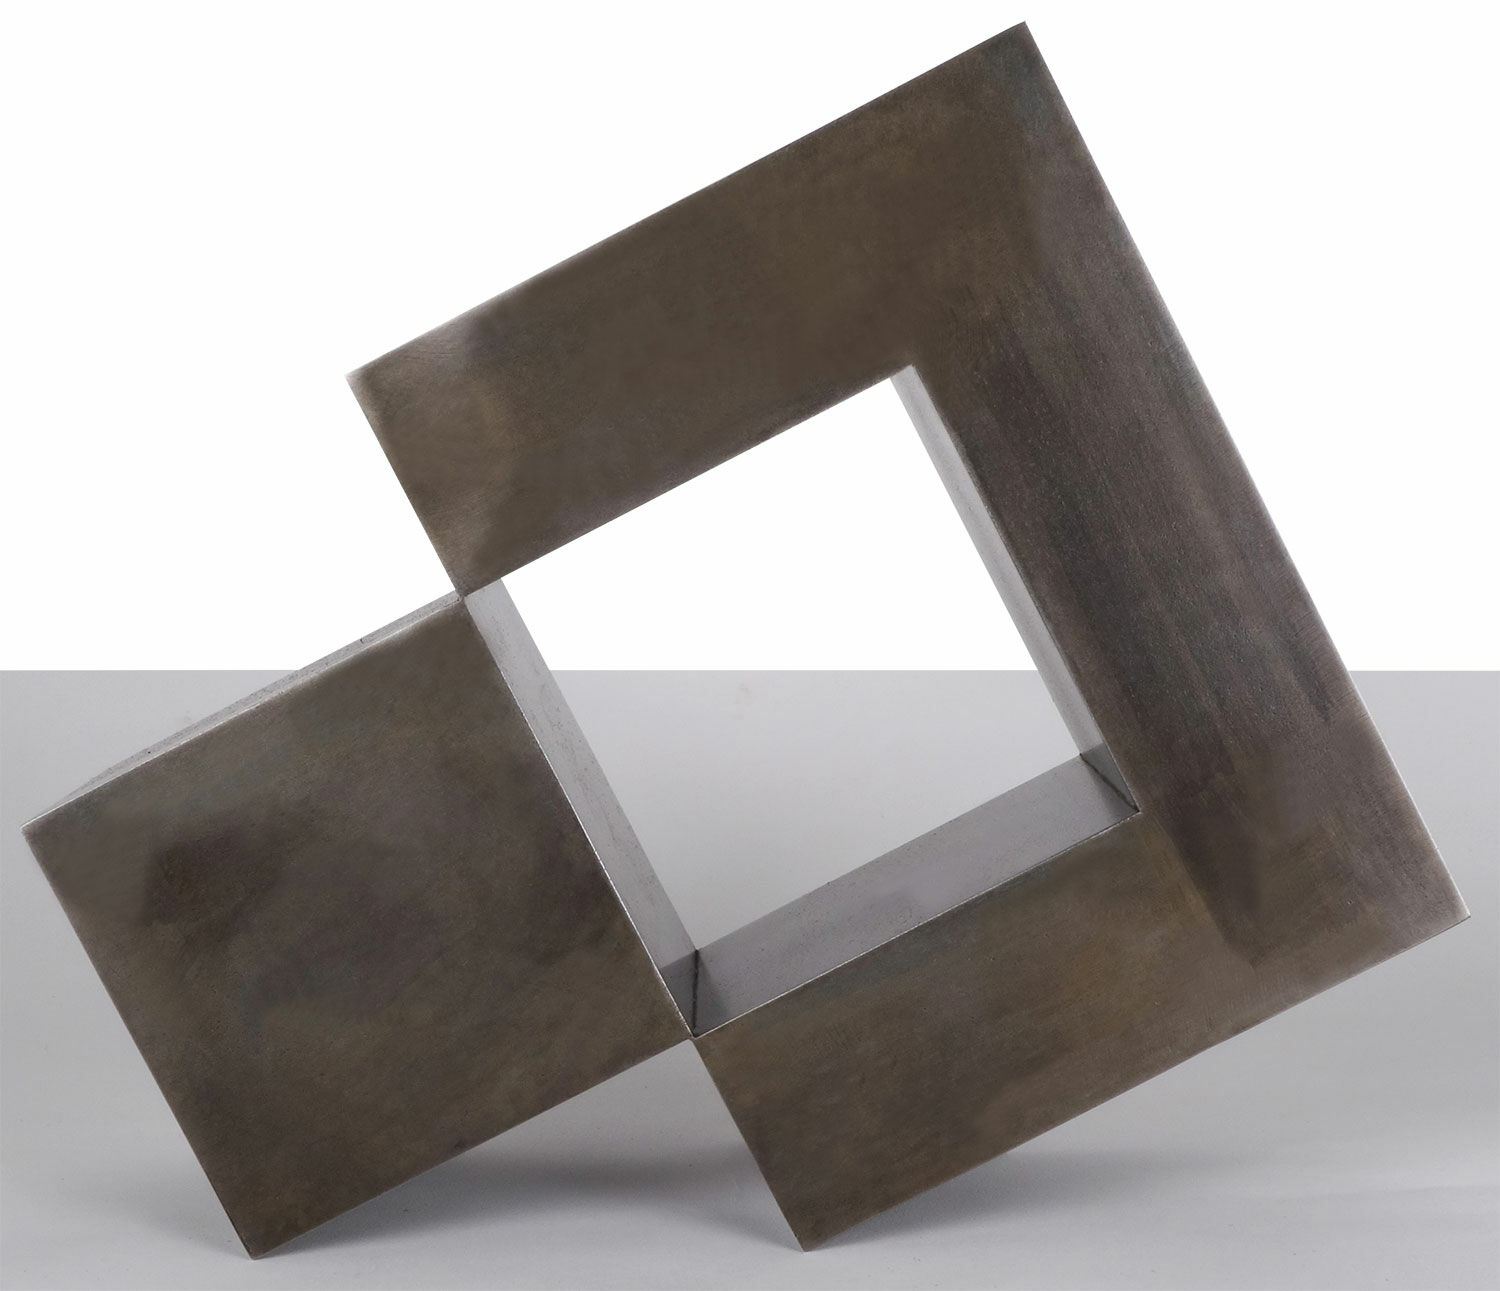 Steel sculpture "ISOLATED CUBE" (2018) by Stephan Siebers